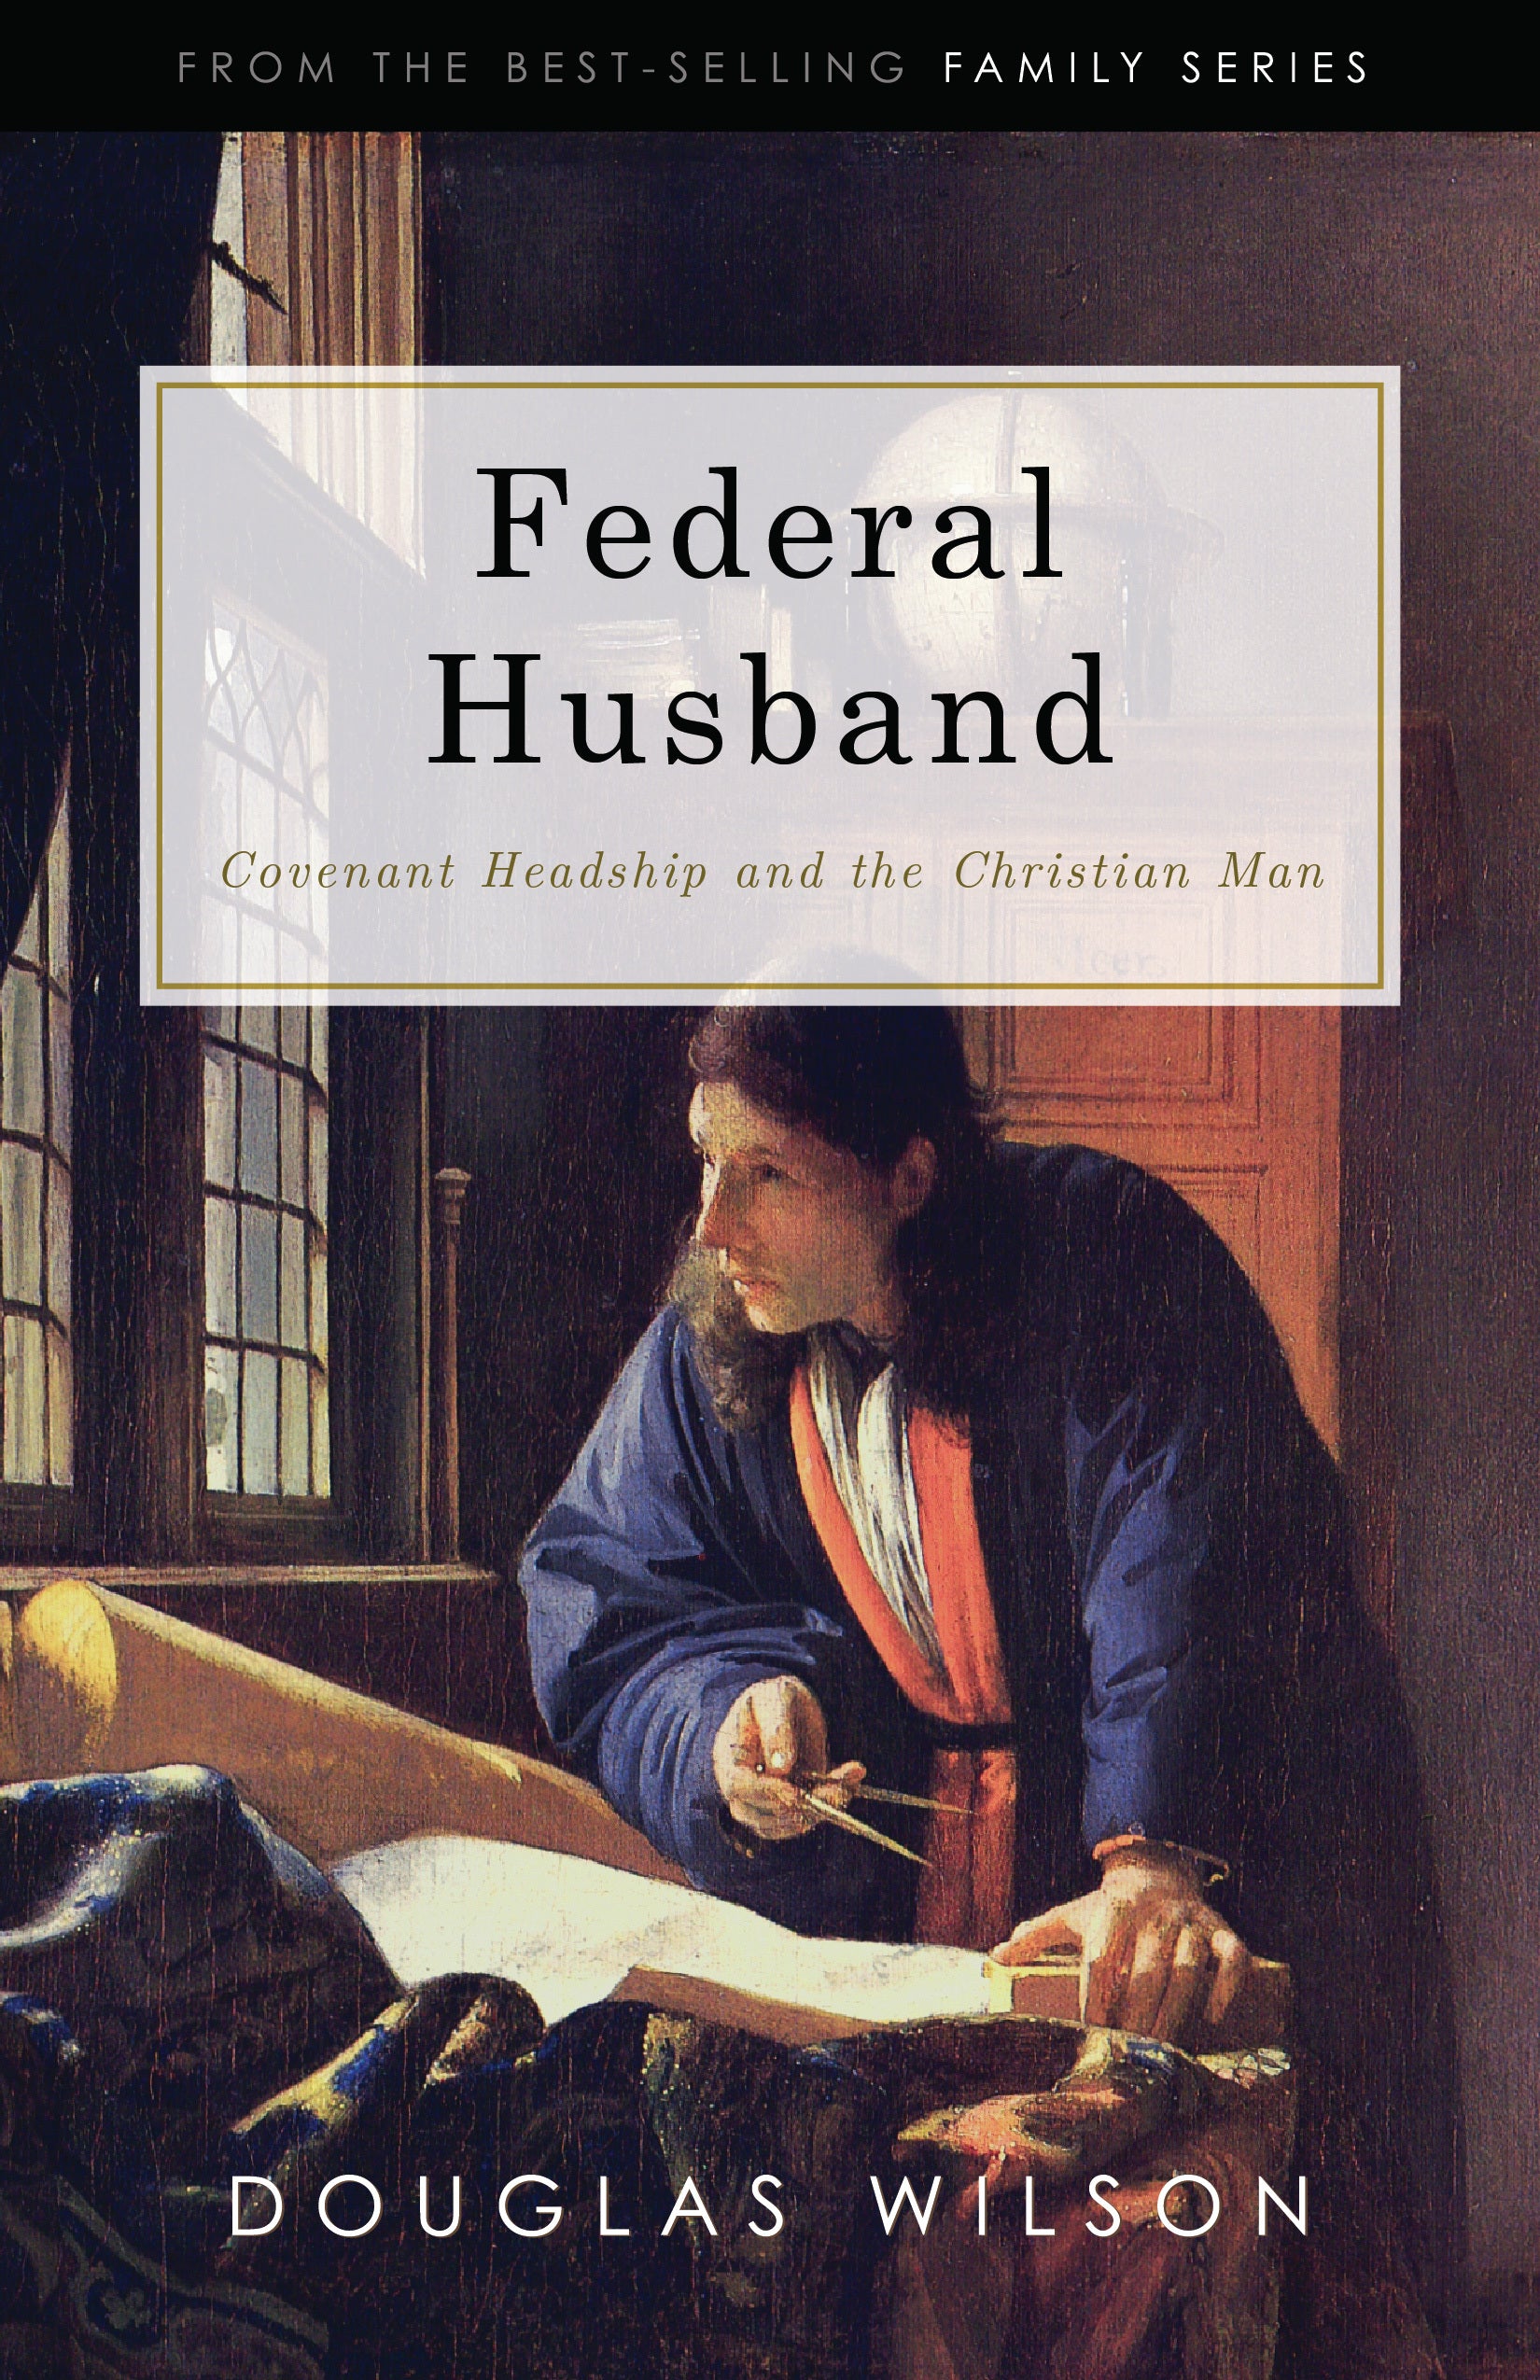 Federal Husband: Covenant Headship and the Christian Man